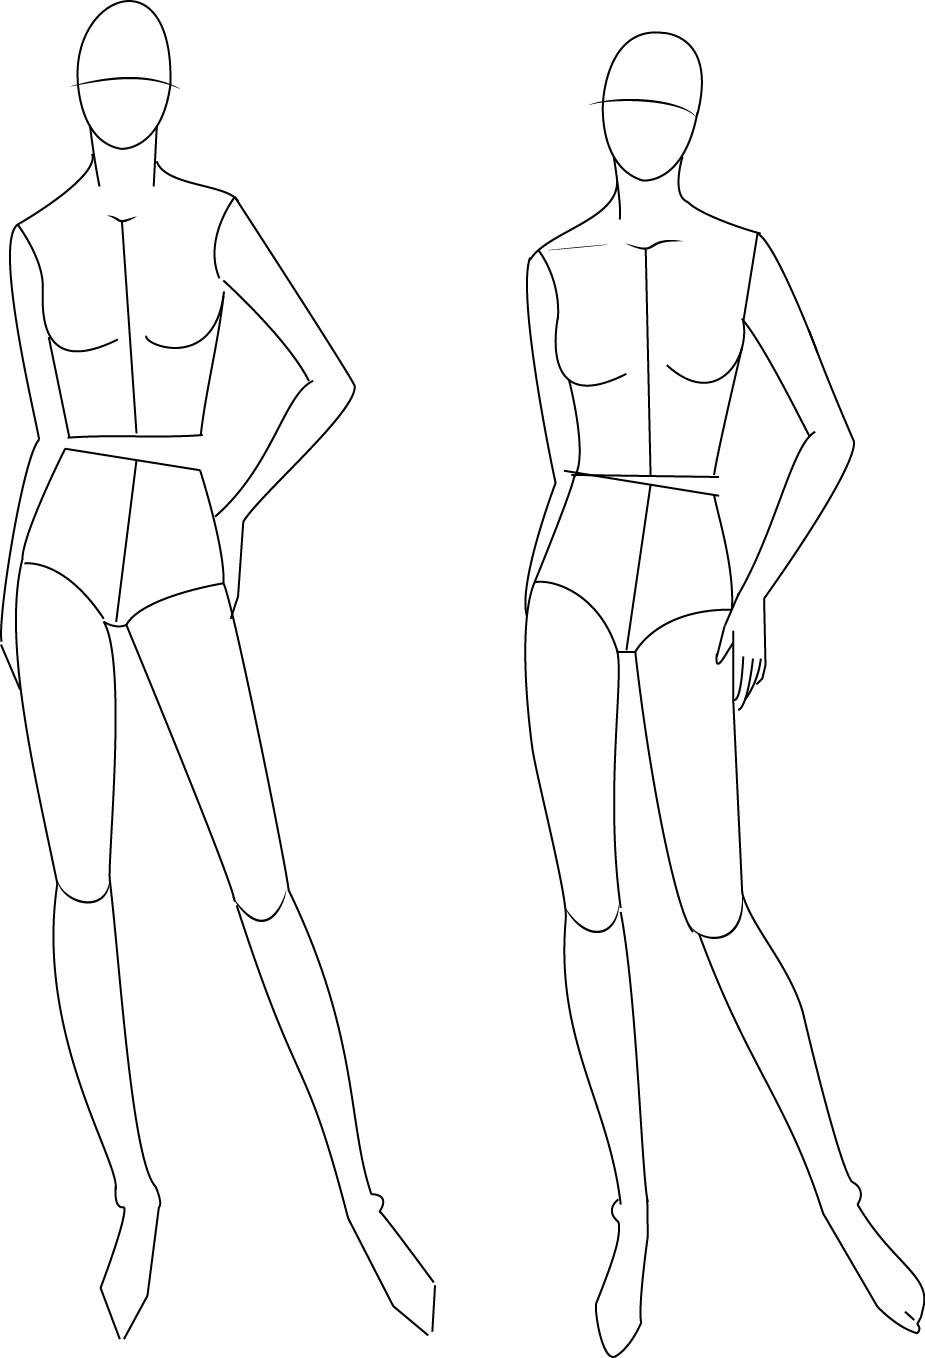 Fashion Drawing For Beginners at GetDrawings | Free download